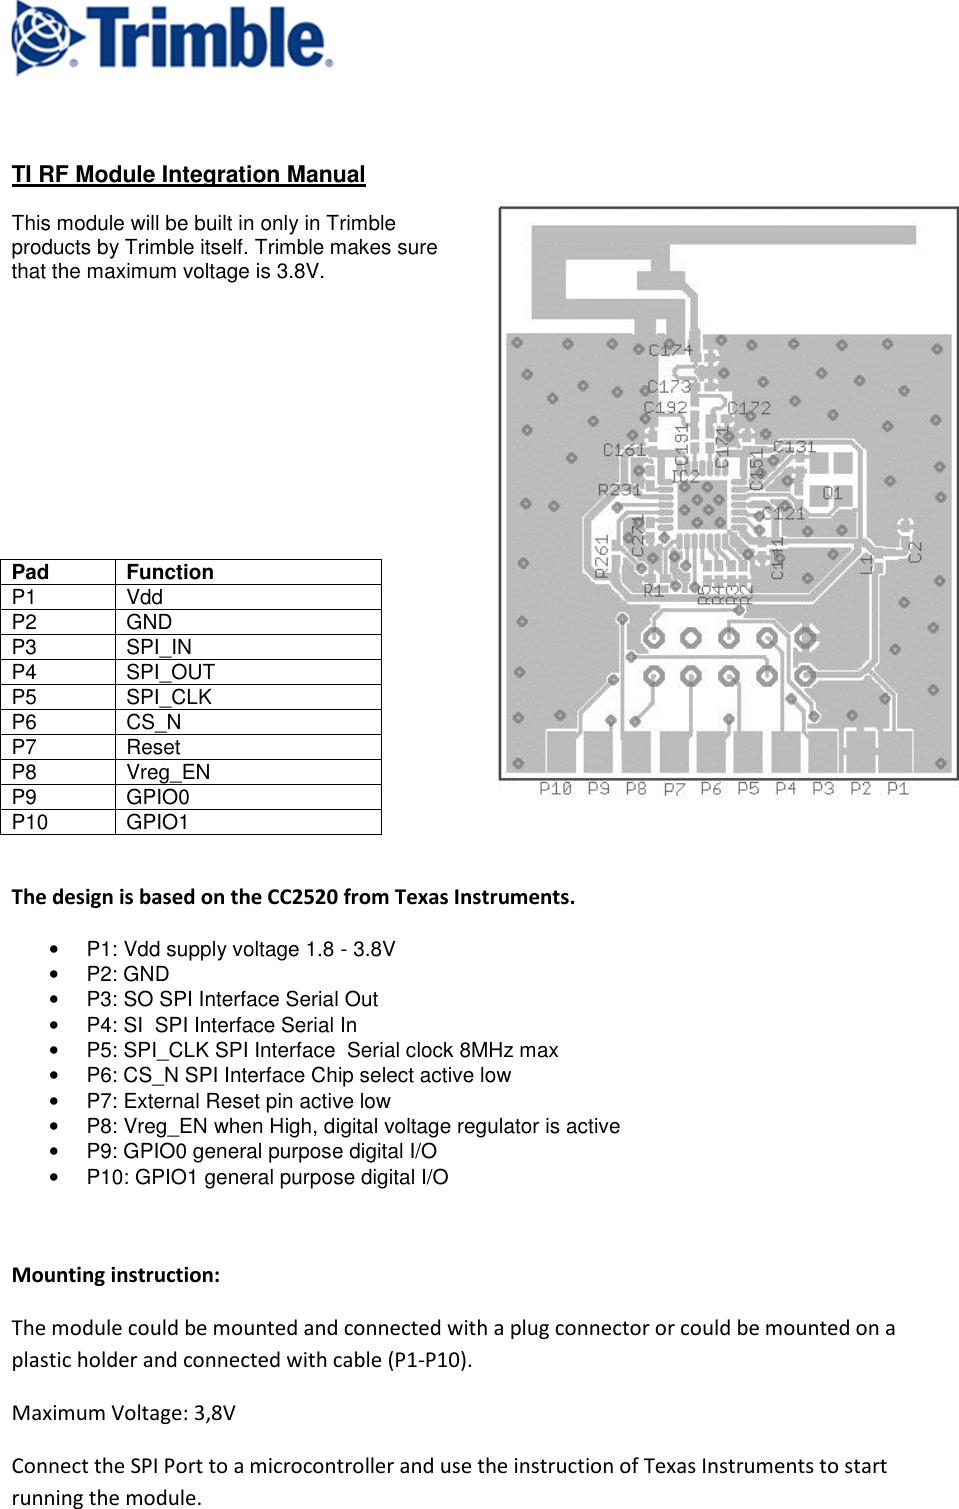     TI RF Module Integration Manual  This module will be built in only in Trimble products by Trimble itself. Trimble makes sure that the maximum voltage is 3.8V.                          The design is based on the CC2520 from Texas Instruments. •  P1: Vdd supply voltage 1.8 - 3.8V •  P2: GND •  P3: SO SPI Interface Serial Out •  P4: SI  SPI Interface Serial In •  P5: SPI_CLK SPI Interface  Serial clock 8MHz max •  P6: CS_N SPI Interface Chip select active low •  P7: External Reset pin active low •  P8: Vreg_EN when High, digital voltage regulator is active •  P9: GPIO0 general purpose digital I/O •  P10: GPIO1 general purpose digital I/O    Mounting instruction: The module could be mounted and connected with a plug connector or could be mounted on a plastic holder and connected with cable (P1-P10). Maximum Voltage: 3,8V Connect the SPI Port to a microcontroller and use the instruction of Texas Instruments to start running the module. Pad Function P1  Vdd P2  GND P3  SPI_IN P4  SPI_OUT P5  SPI_CLK P6  CS_N P7  Reset P8  Vreg_EN P9  GPIO0 P10  GPIO1 